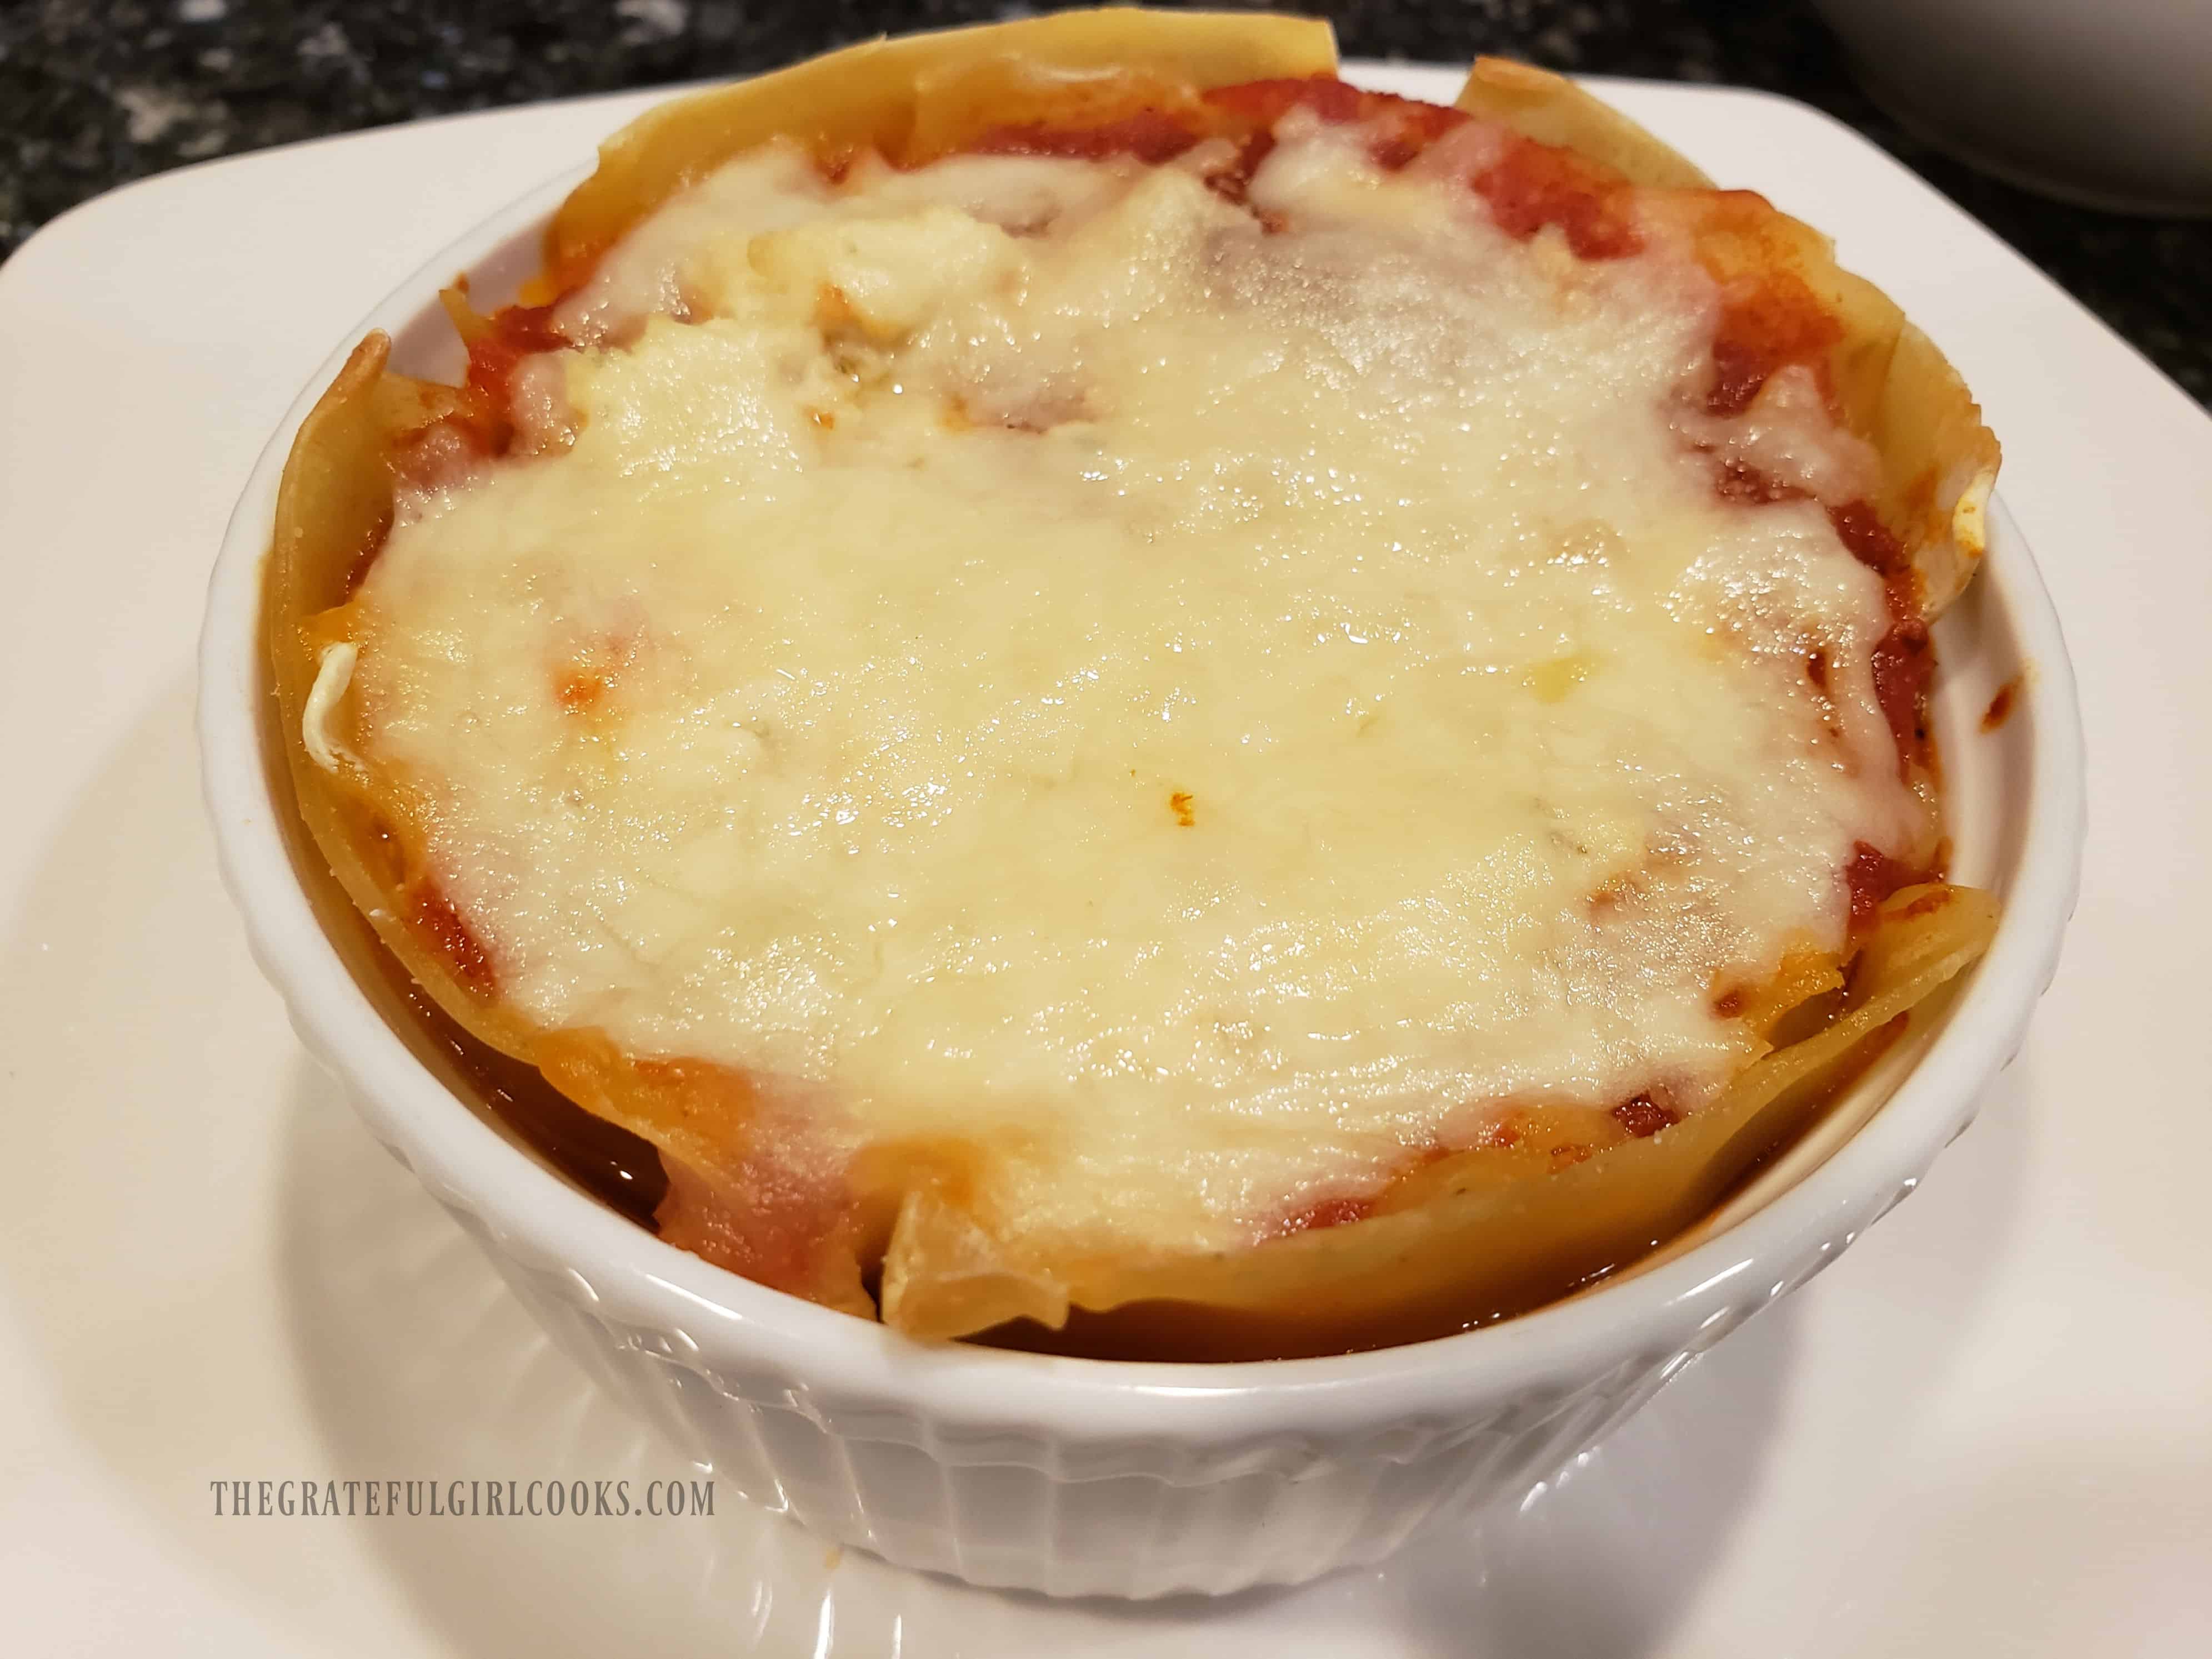 One of the mini lasagna bowls, after baking, and ready to enjoy!